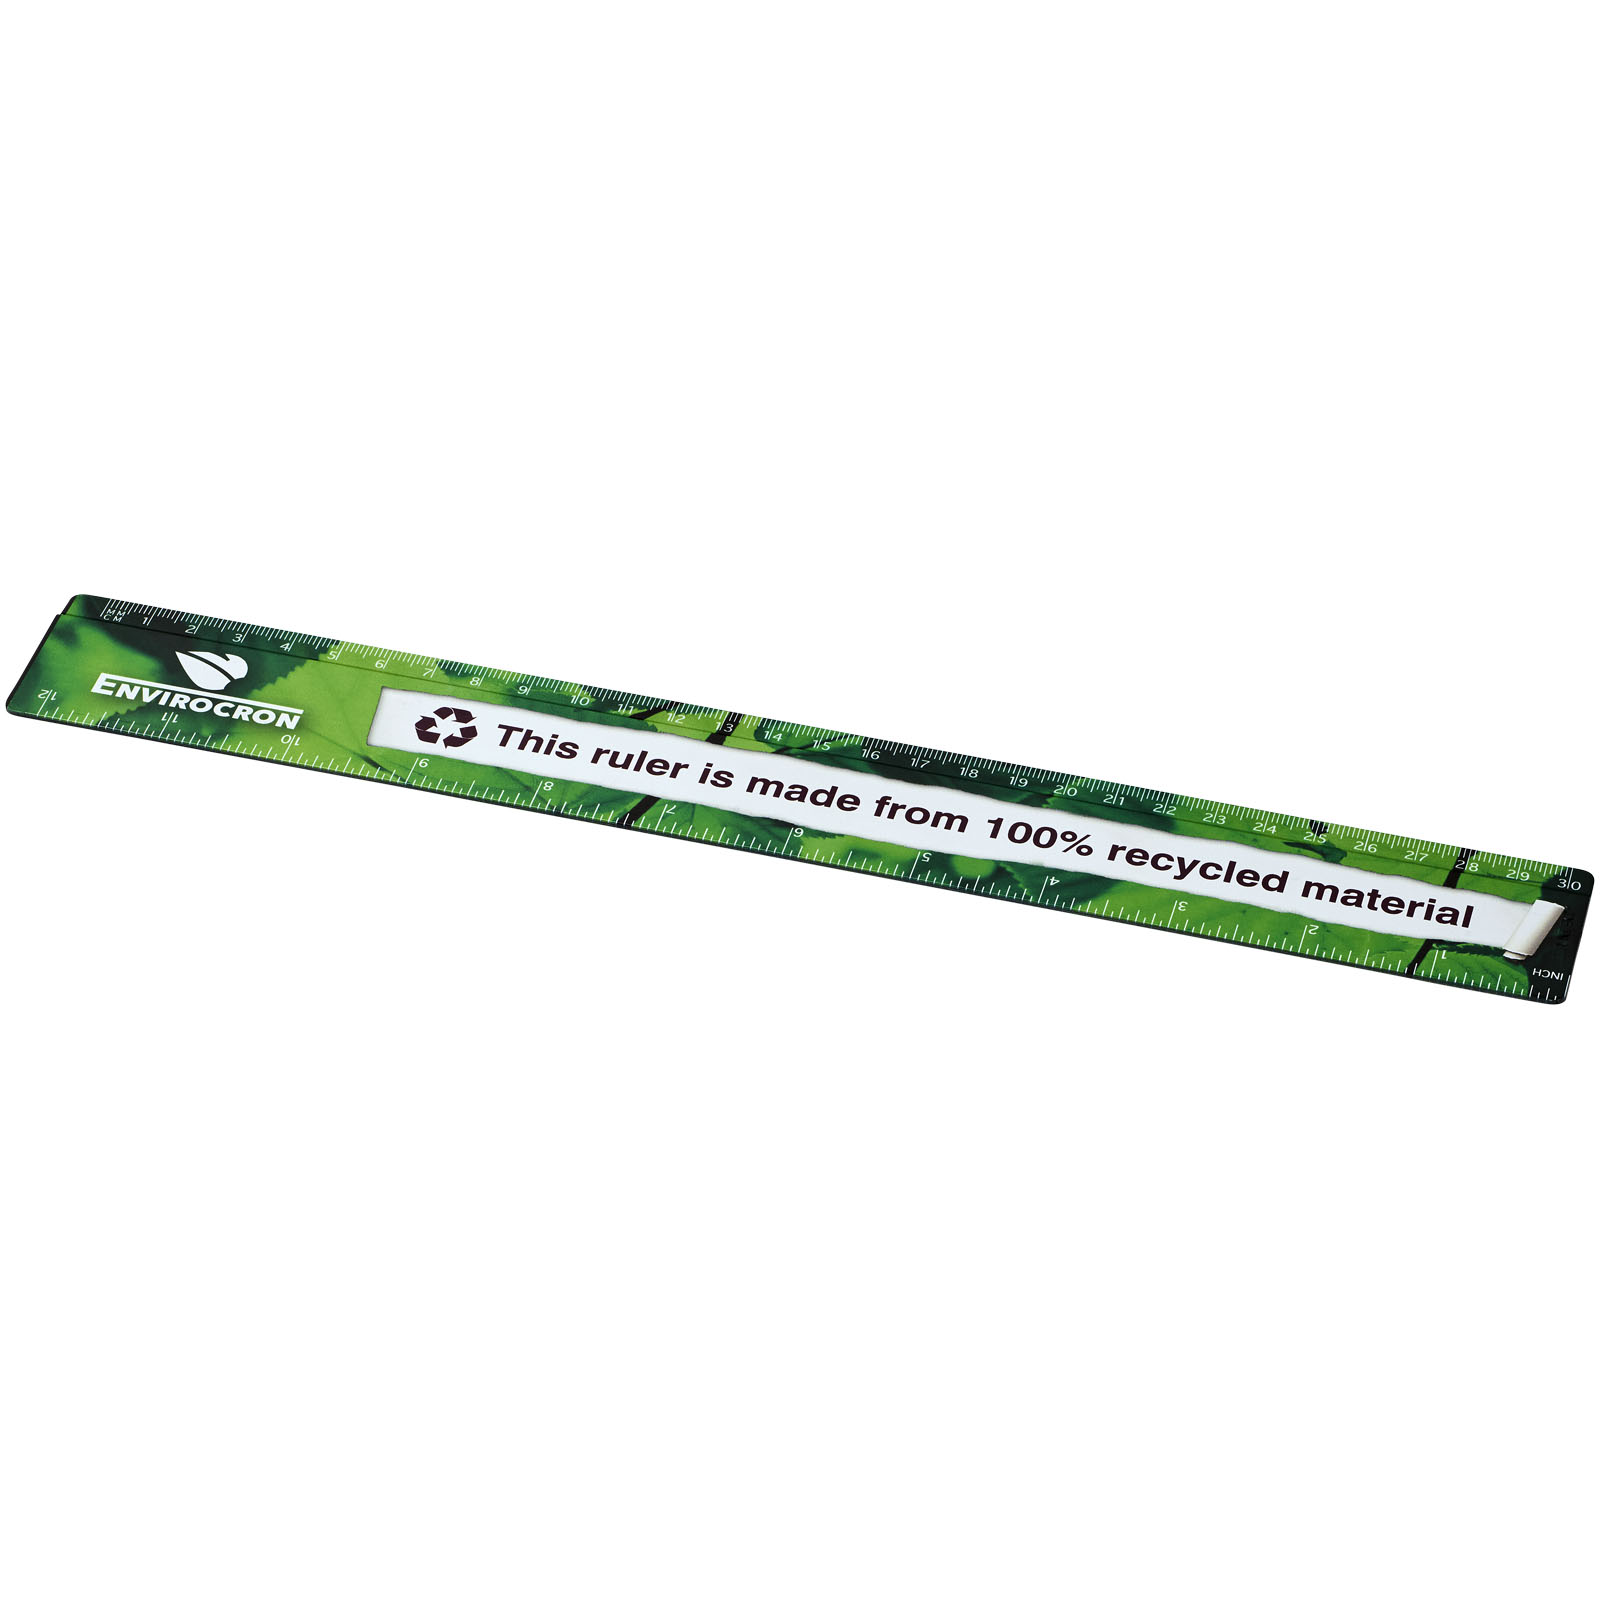 Recycled Plastic Ruler - Cleethorpes